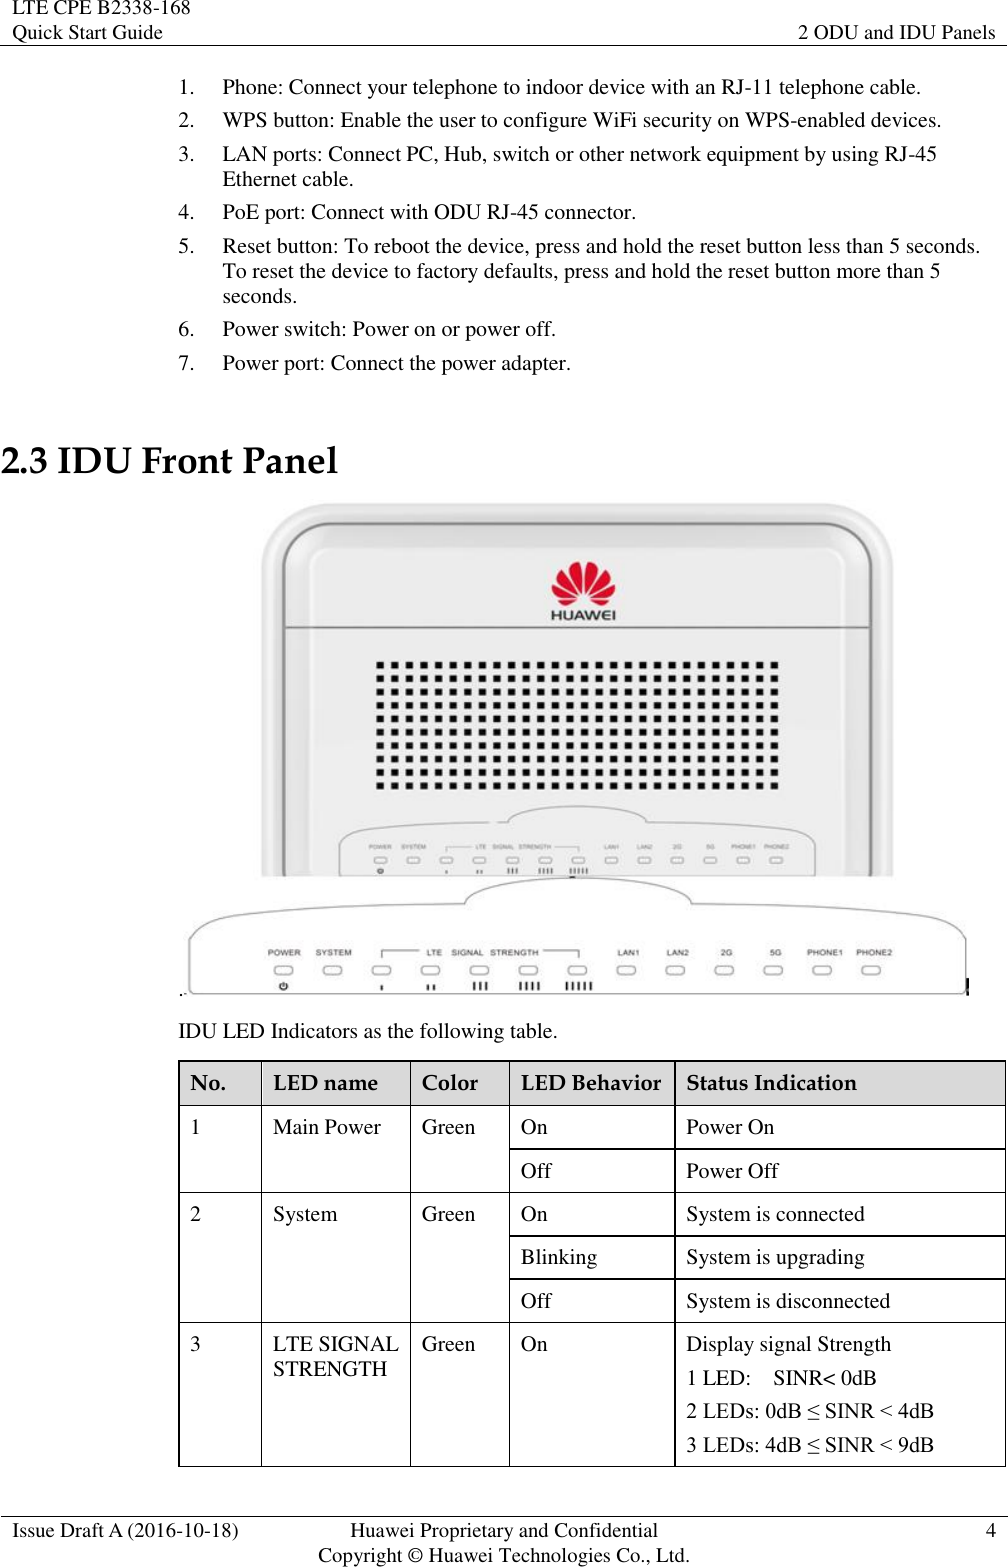 LTE CPE B2338-168   Quick Start Guide 2 ODU and IDU Panels  Issue Draft A (2016-10-18) Huawei Proprietary and Confidential                                     Copyright ©  Huawei Technologies Co., Ltd. 4  1. Phone: Connect your telephone to indoor device with an RJ-11 telephone cable. 2. WPS button: Enable the user to configure WiFi security on WPS-enabled devices. 3. LAN ports: Connect PC, Hub, switch or other network equipment by using RJ-45 Ethernet cable. 4. PoE port: Connect with ODU RJ-45 connector. 5. Reset button: To reboot the device, press and hold the reset button less than 5 seconds. To reset the device to factory defaults, press and hold the reset button more than 5 seconds. 6. Power switch: Power on or power off. 7. Power port: Connect the power adapter. 2.3 IDU Front Panel .  IDU LED Indicators as the following table. No. LED name Color LED Behavior Status Indication 1 Main Power Green On Power On Off Power Off 2 System Green On System is connected Blinking System is upgrading Off System is disconnected 3 LTE SIGNAL     STRENGTH Green On Display signal Strength 1 LED:    SINR&lt; 0dB 2 LEDs: 0dB ≤ SINR &lt; 4dB 3 LEDs: 4dB ≤ SINR &lt; 9dB 